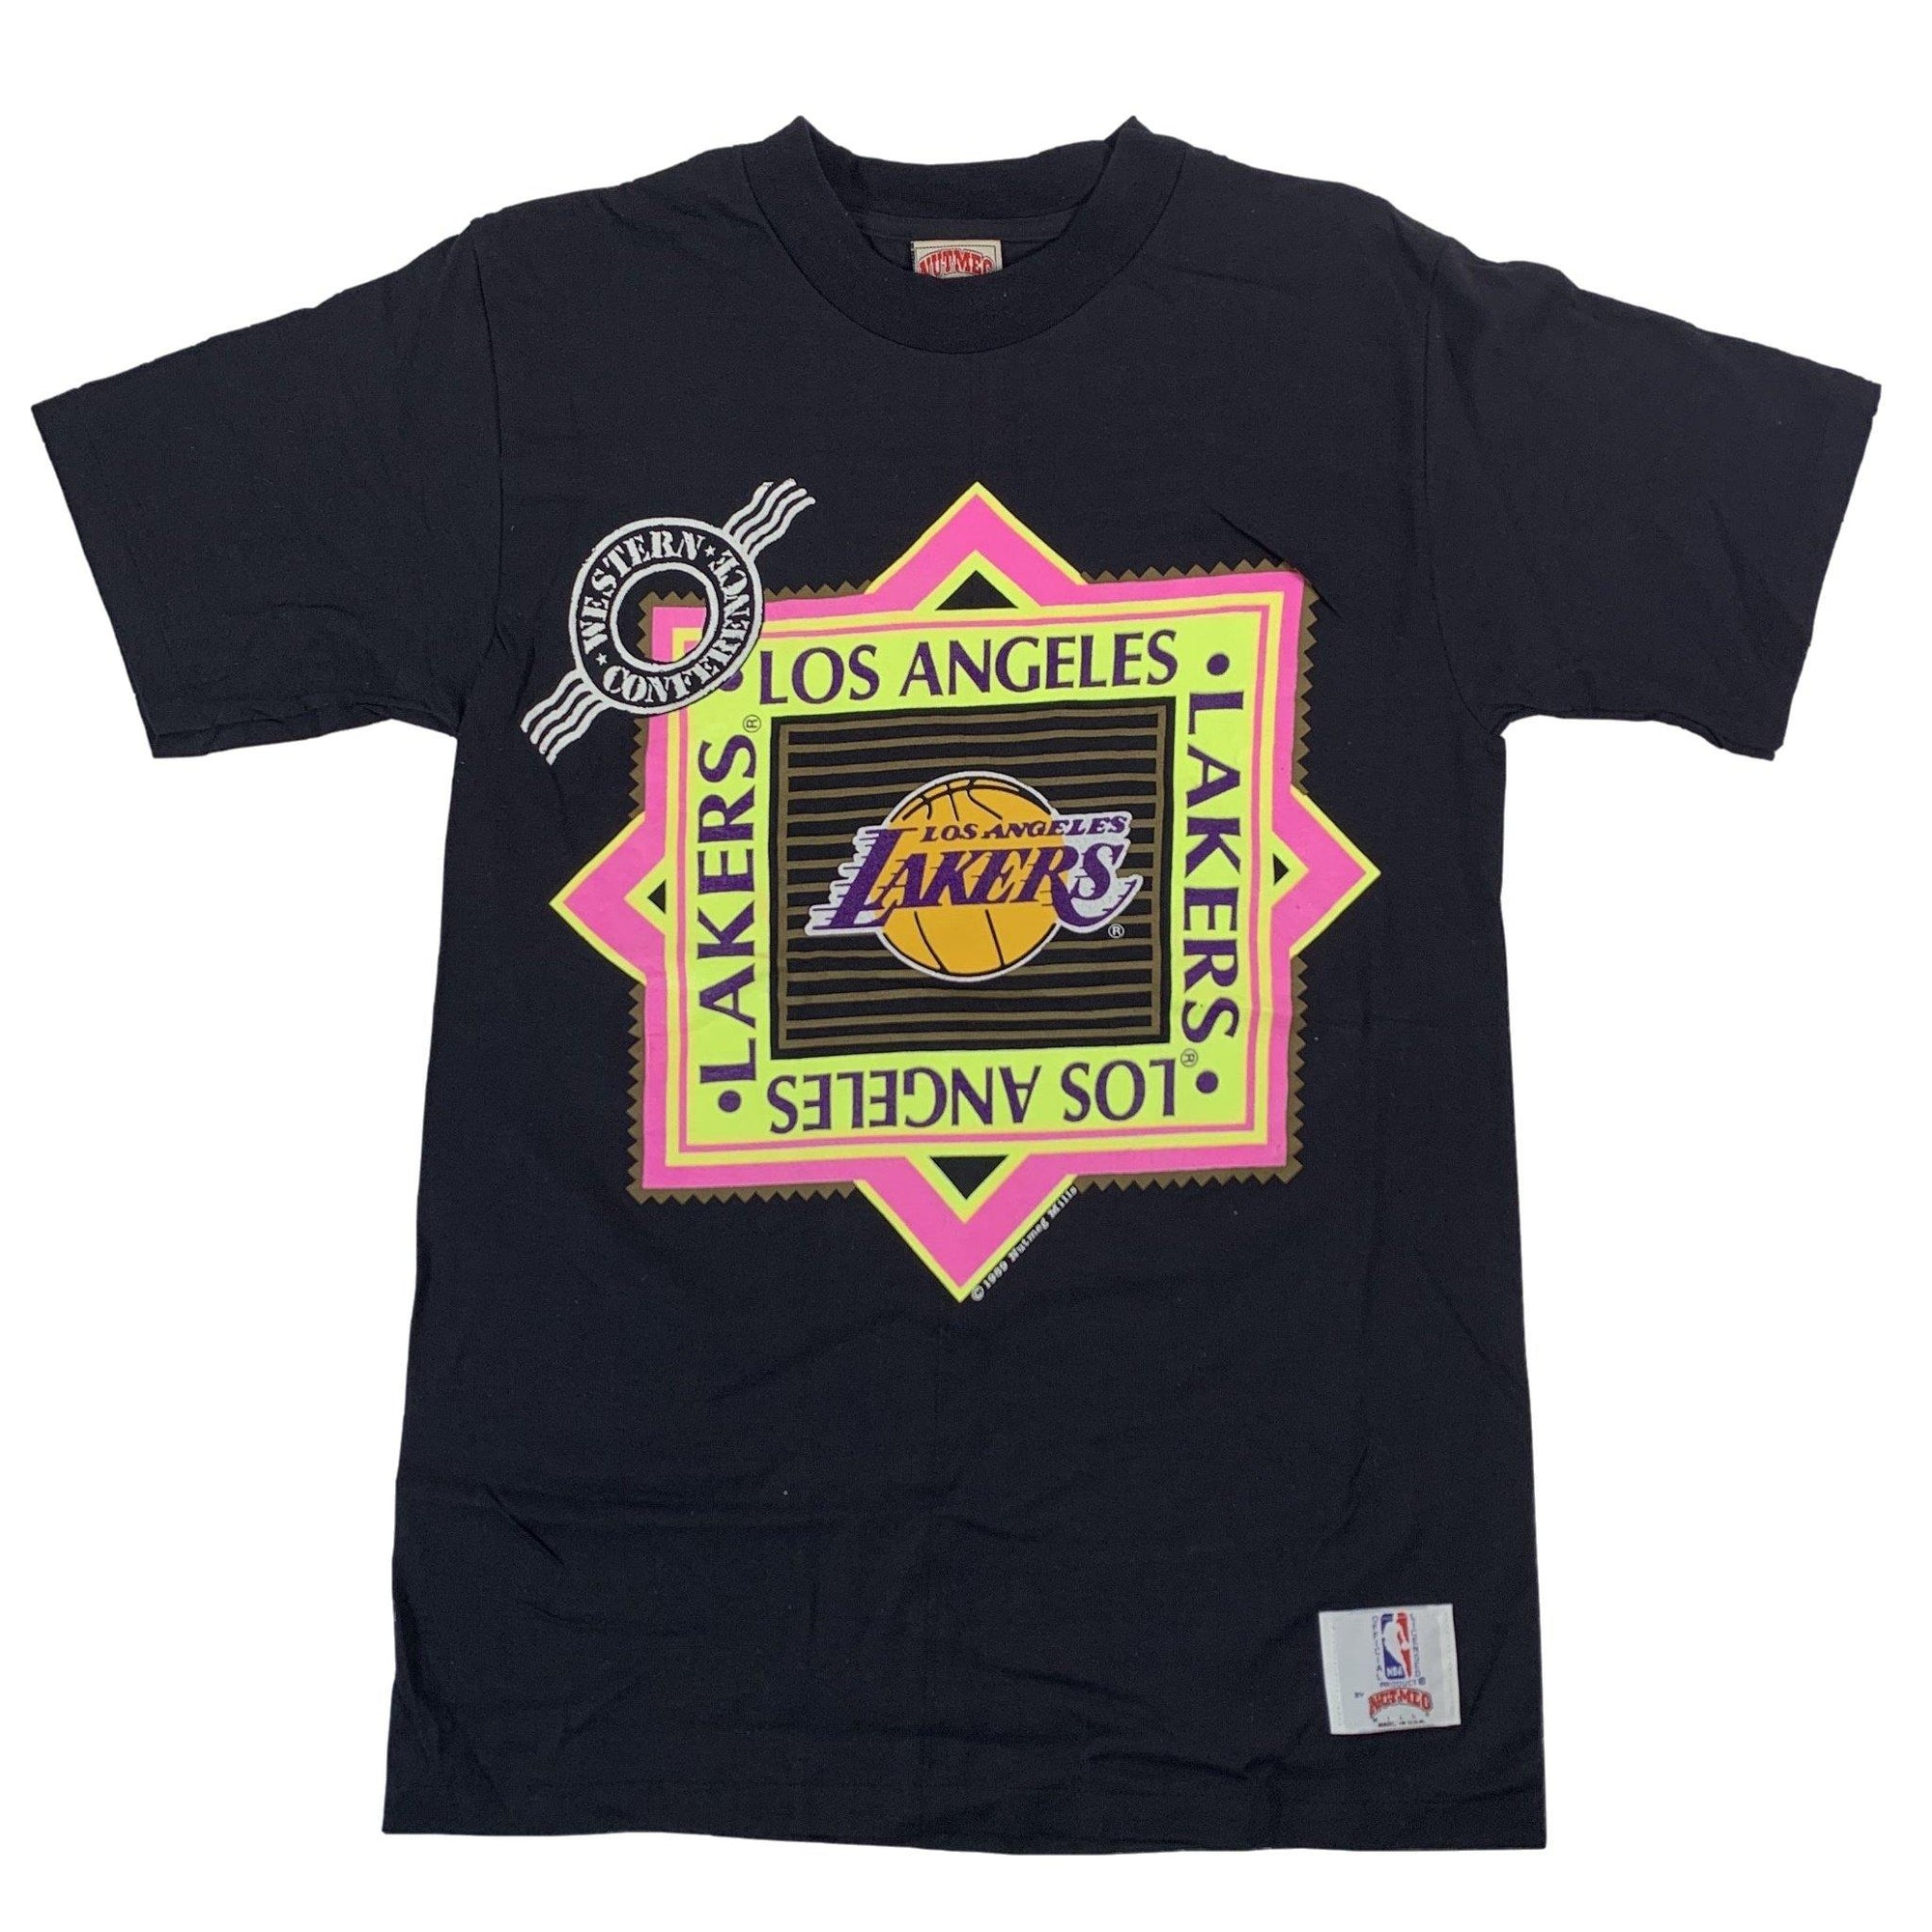 Vintage Los Angeles Lakers "Western Conference" T-Shirt - jointcustodydc